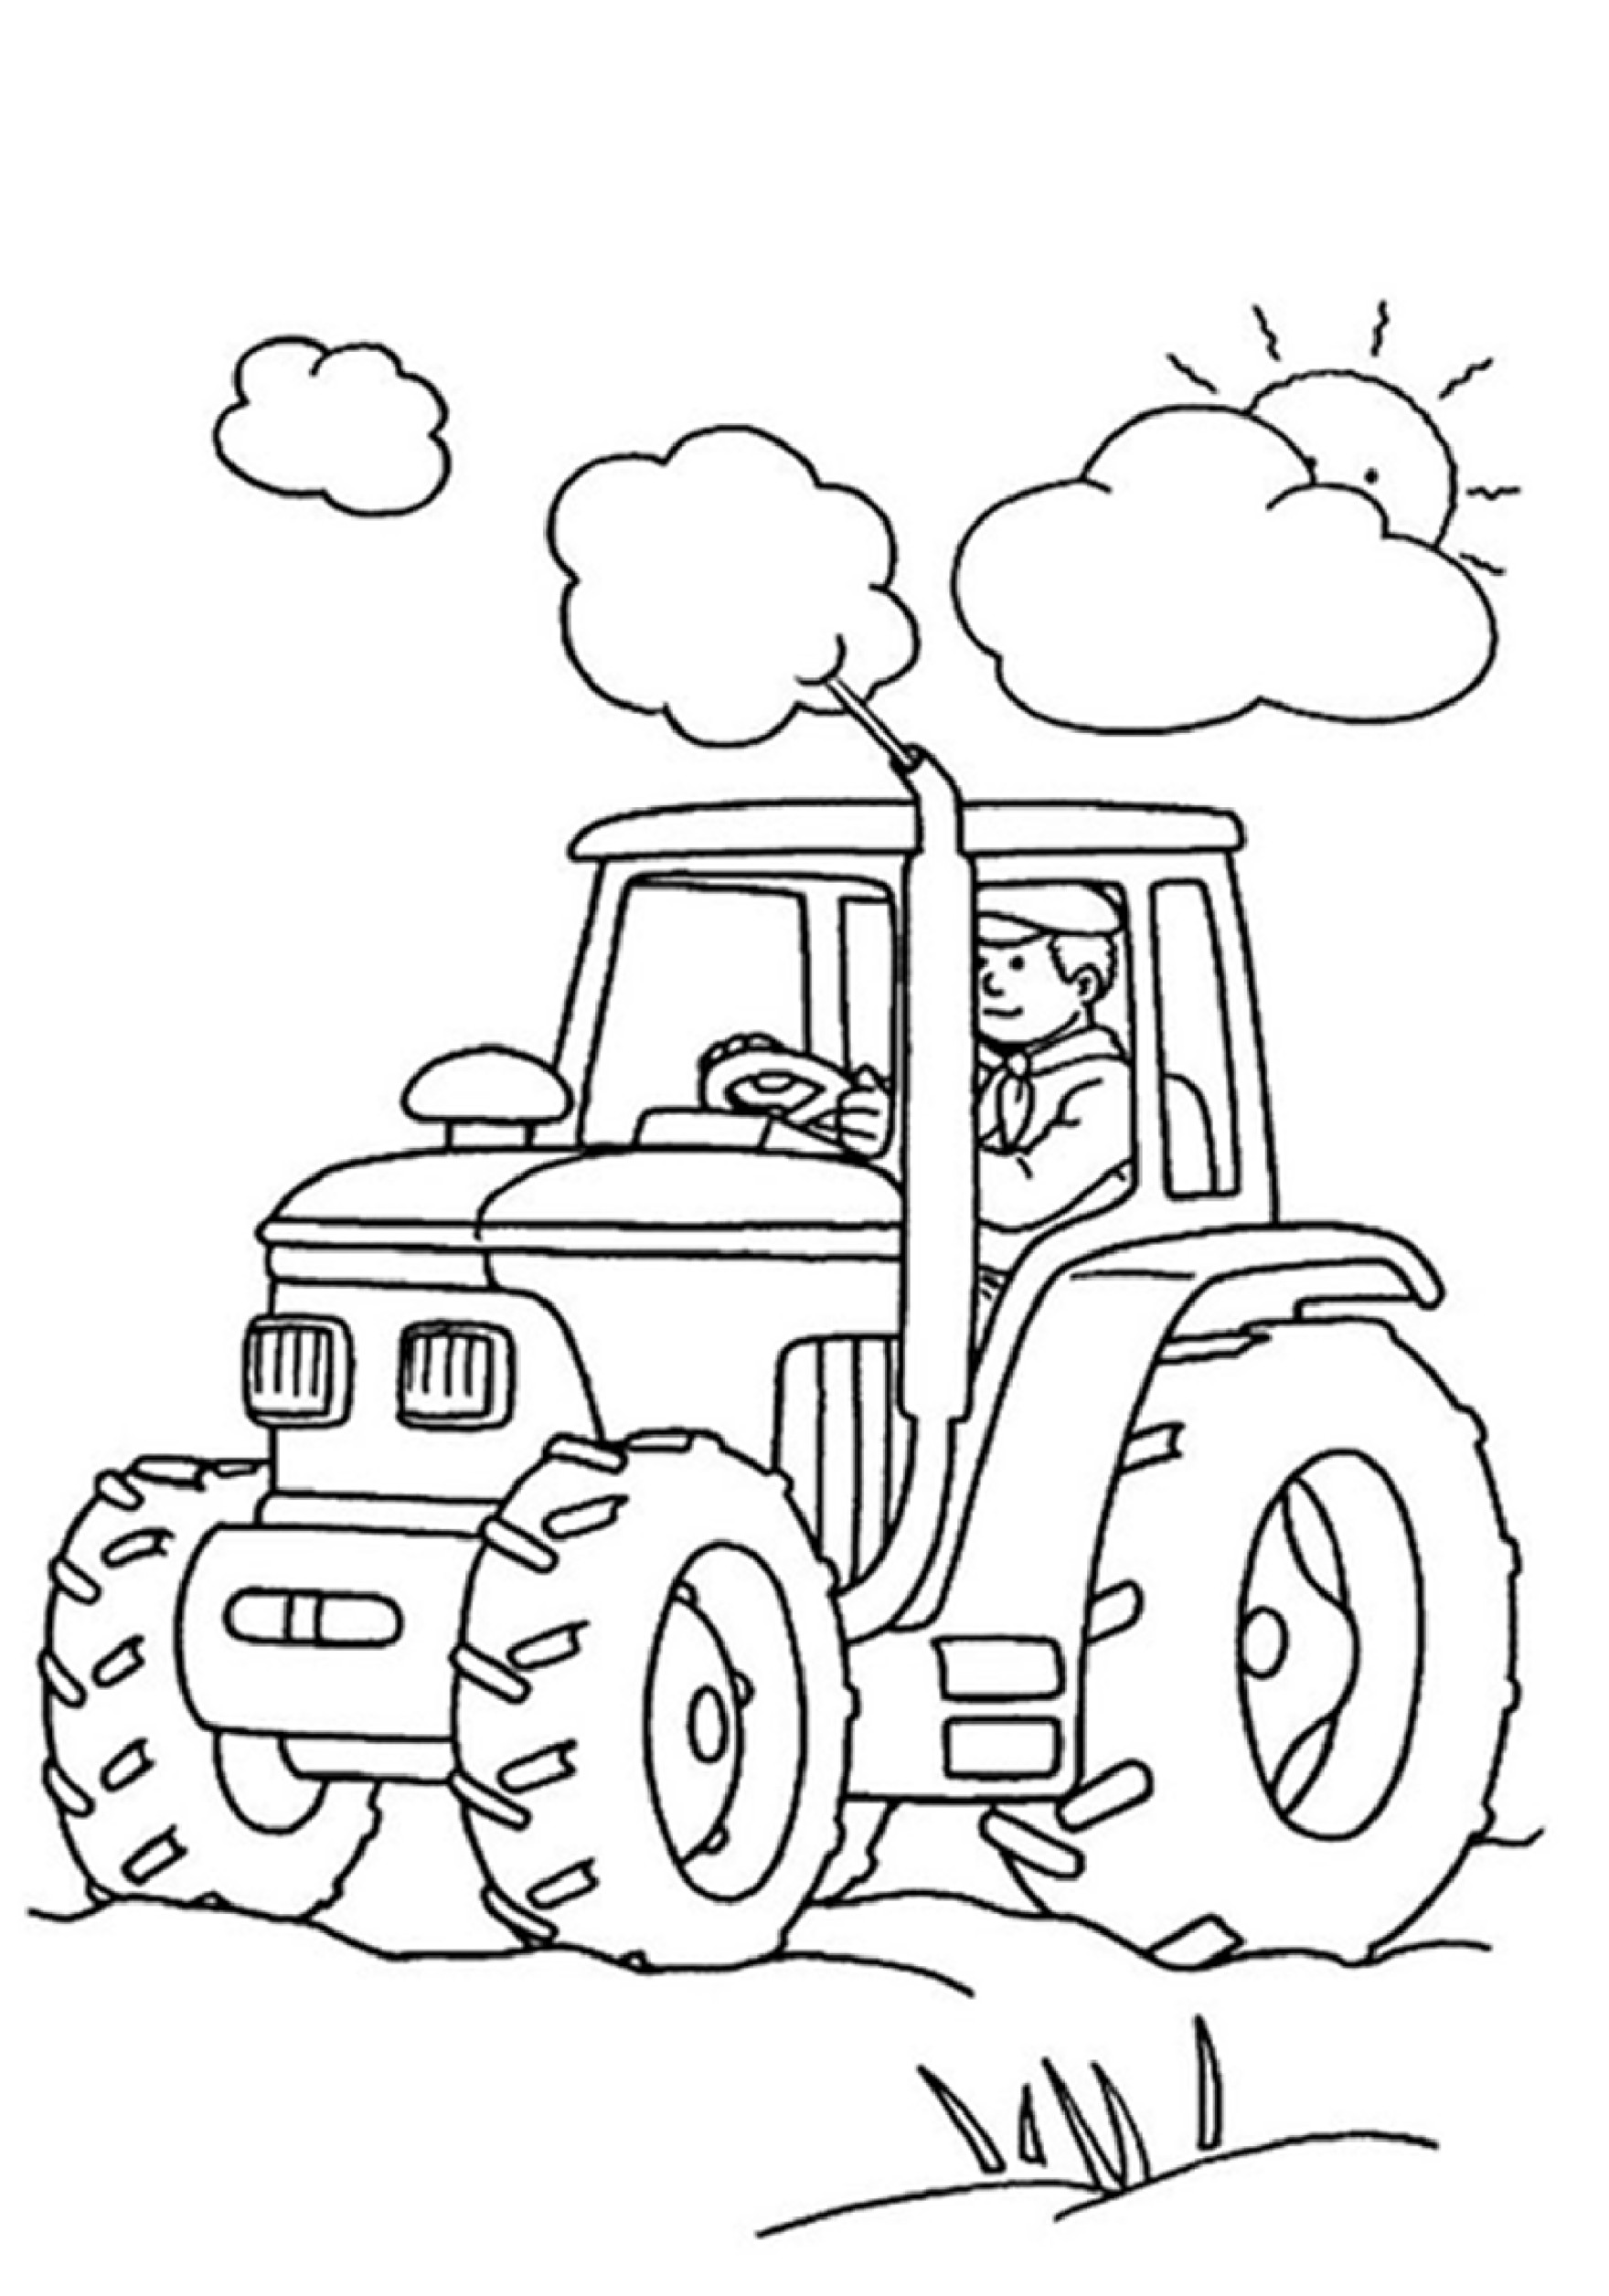 Coloring Sheets Boys
 Boy Coloring Pages Pdf Coloring Home